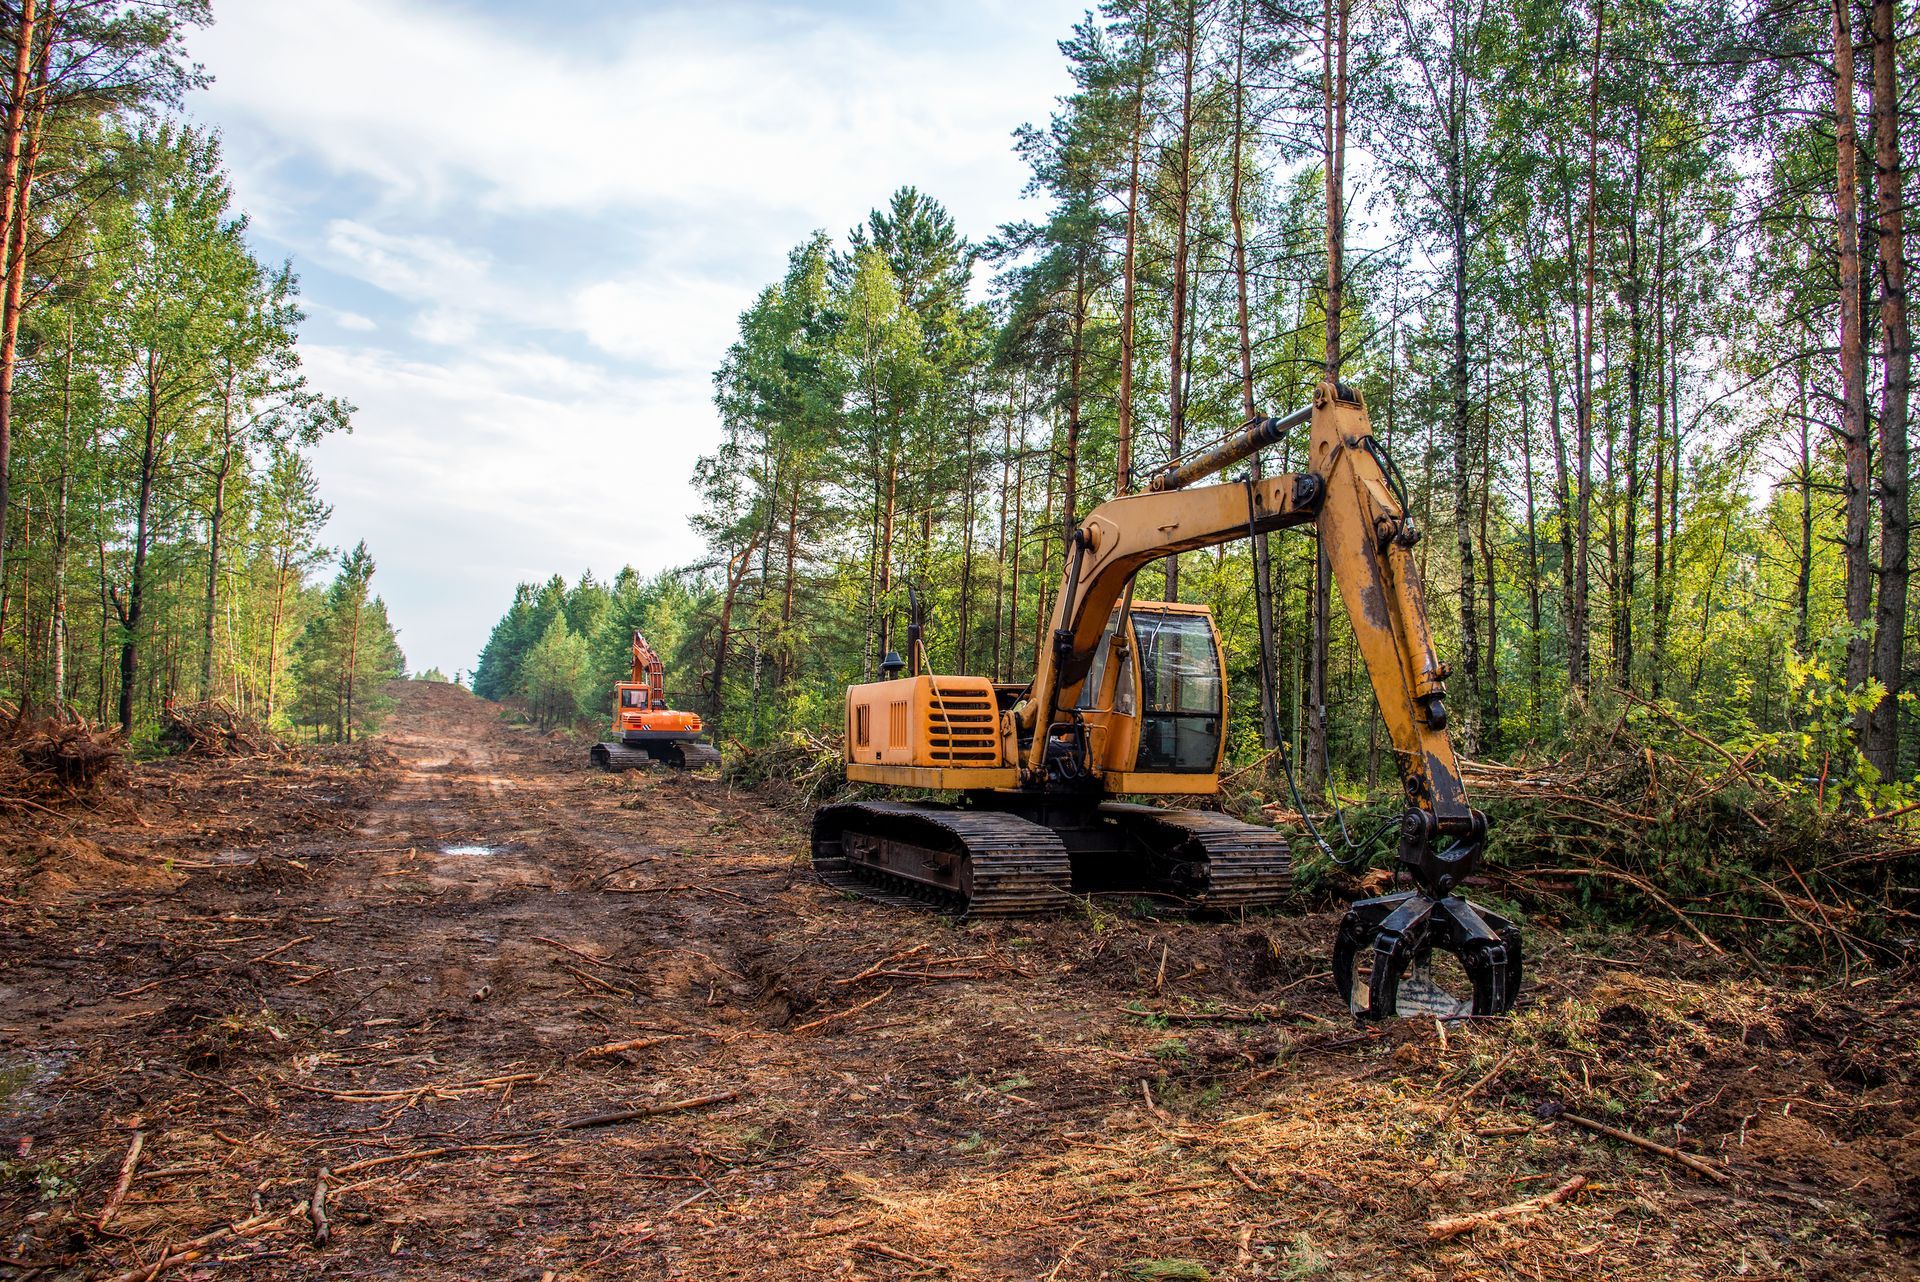 Excavator clearing a forest